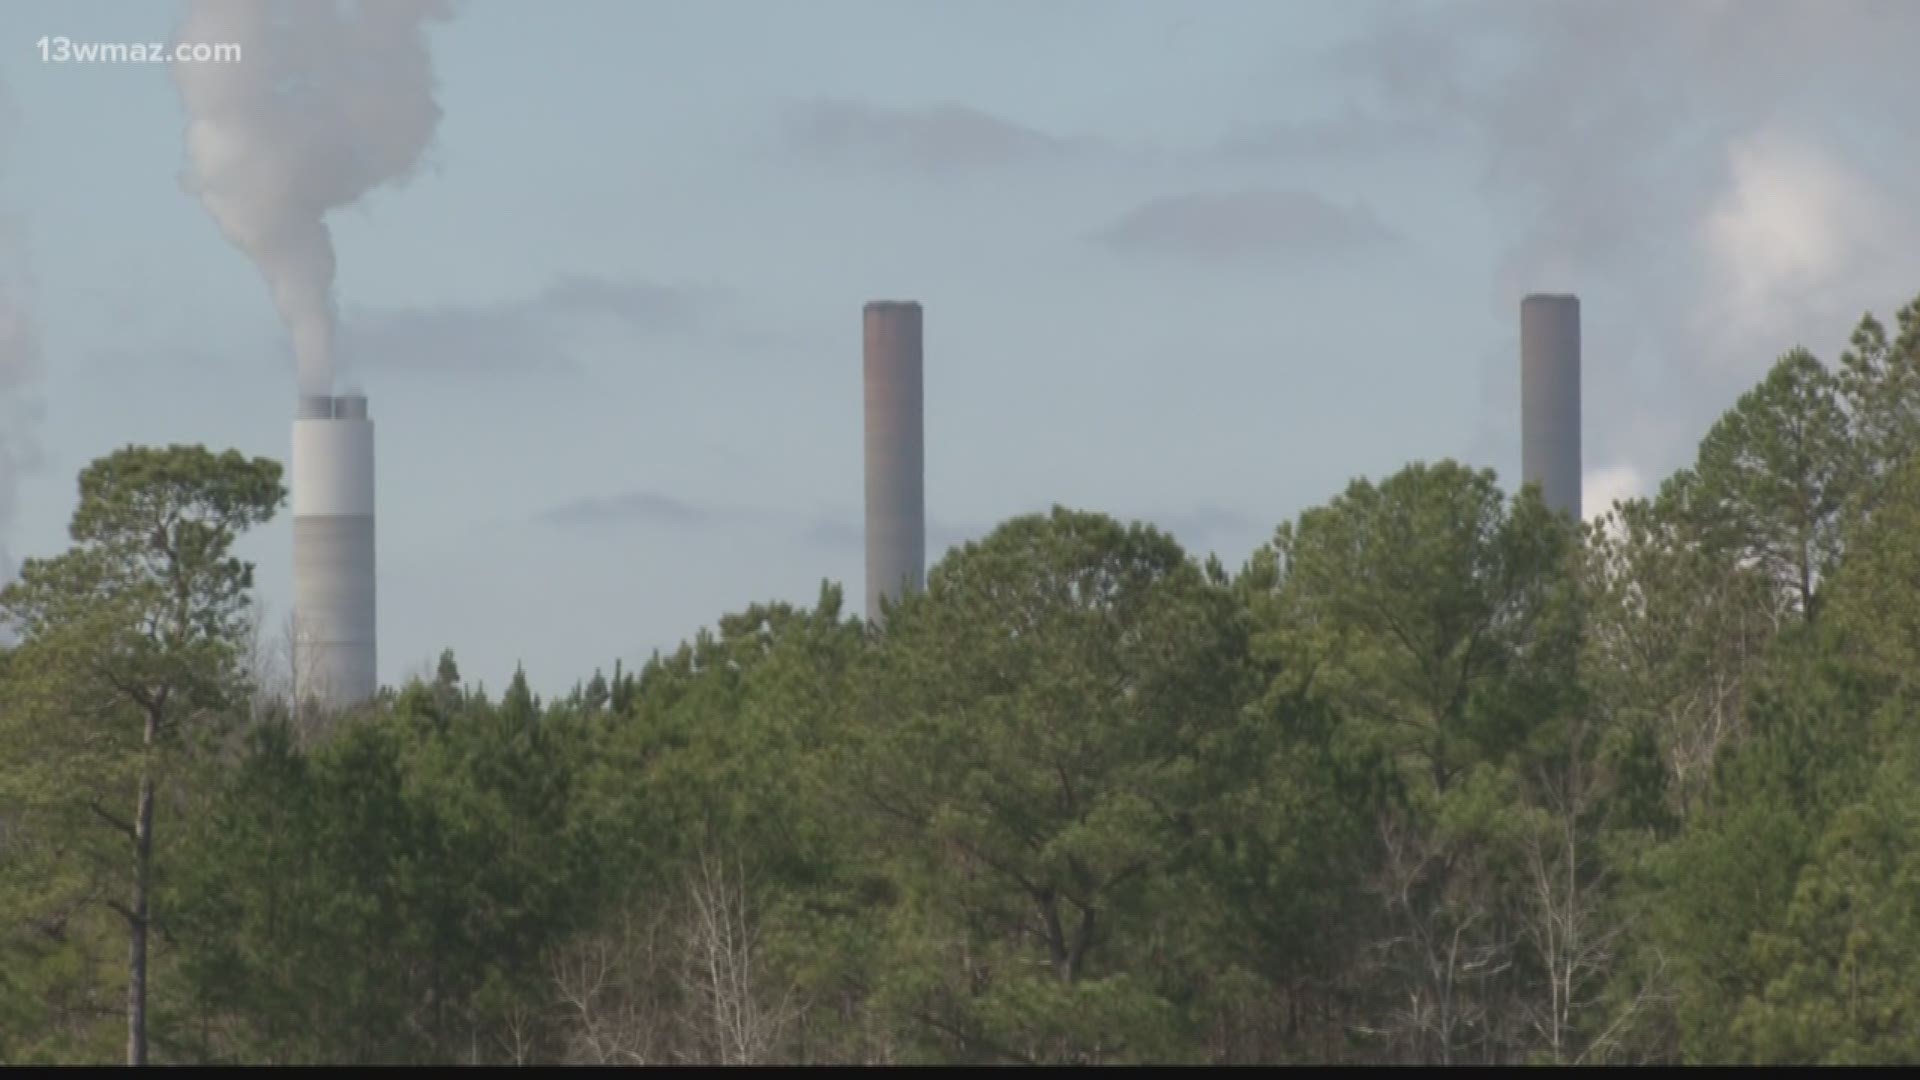 People living around Plant Scherer in Juliette have concerns about their drinking water being affected by the plant's coal ash.